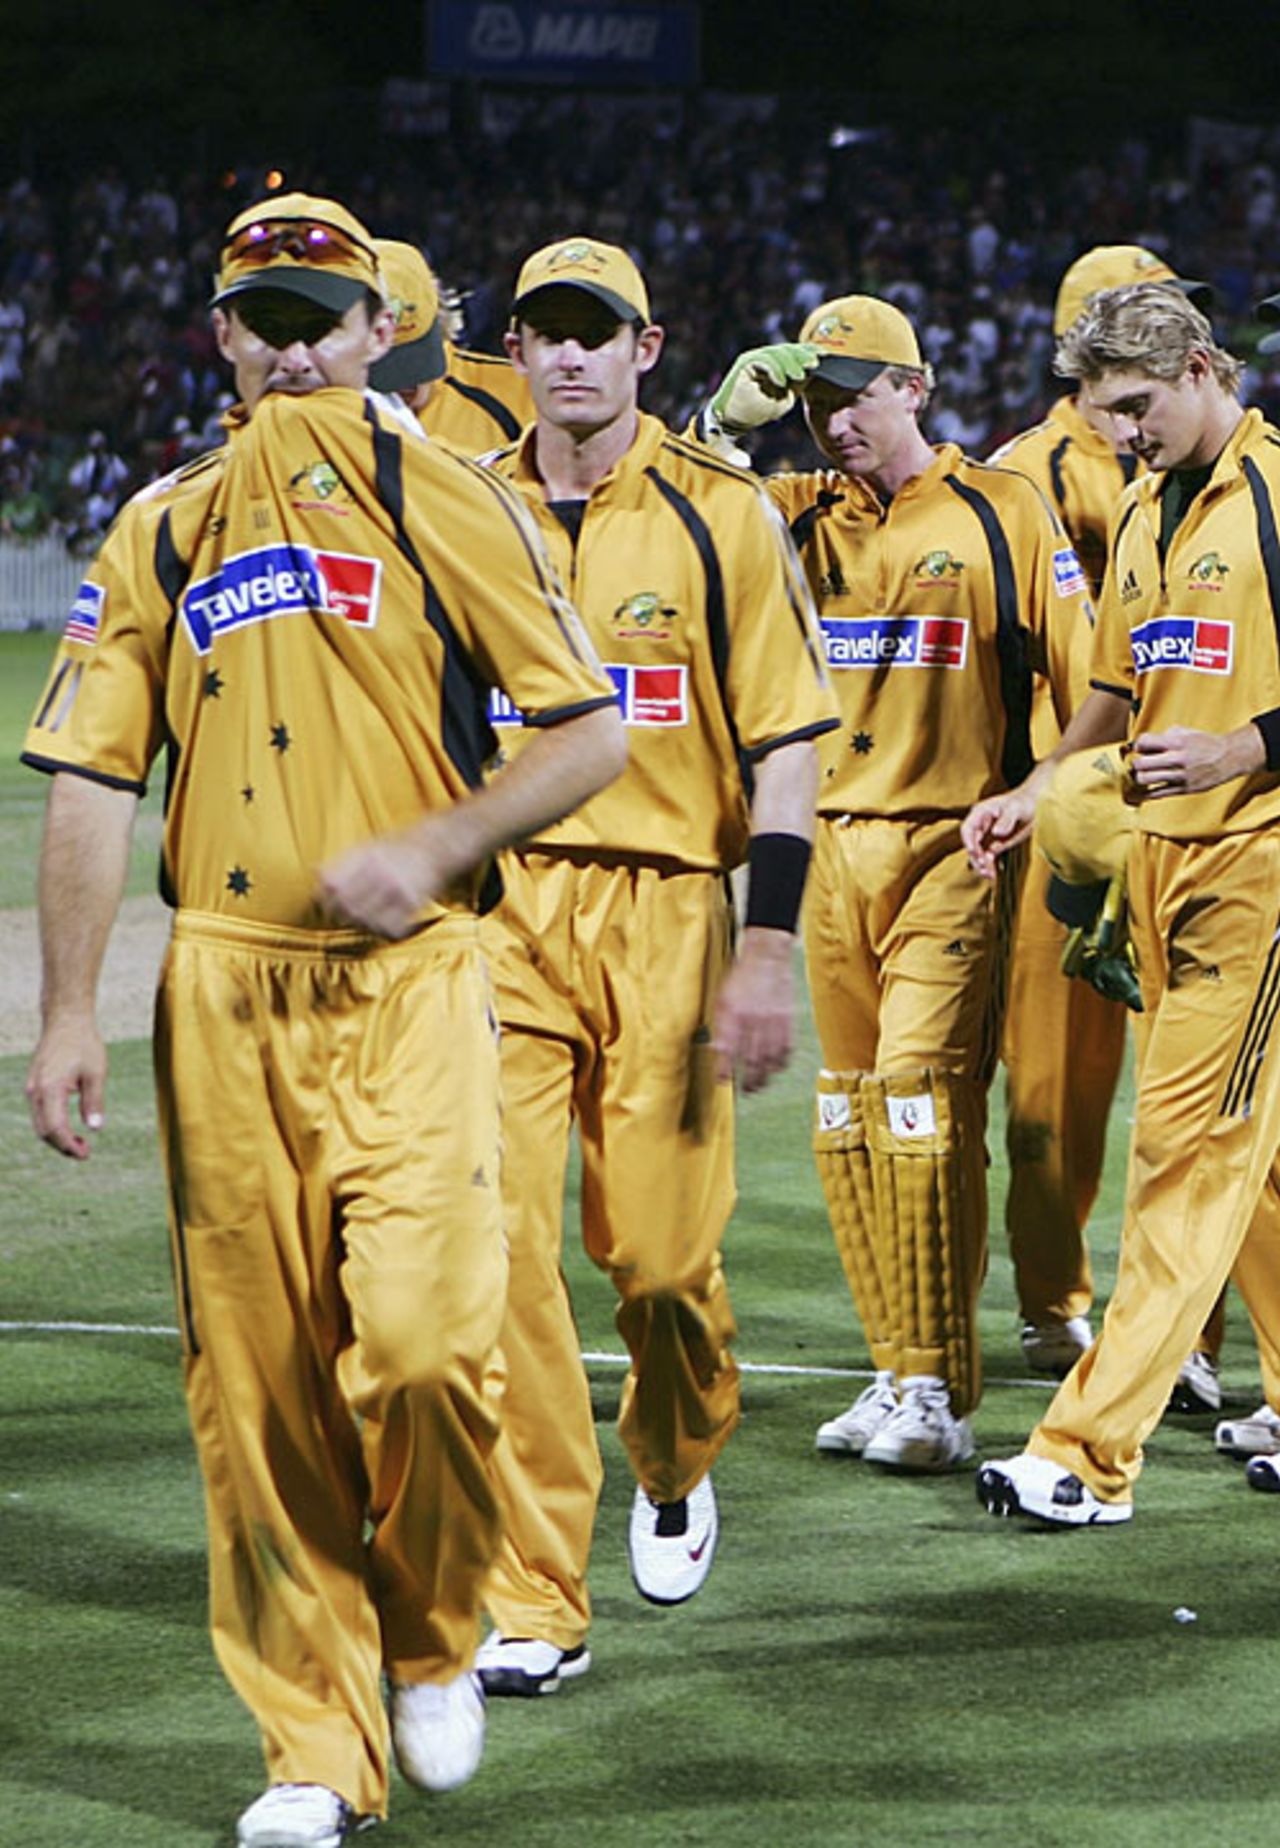 Brad Hogg and Michael Hussey lead a dejected Australia off the field after losing 3-0 to New Zealand, New Zealand v Australia, Chappell-Hadlee Trophy, 3rd match, Hamilton, February 20, 2007